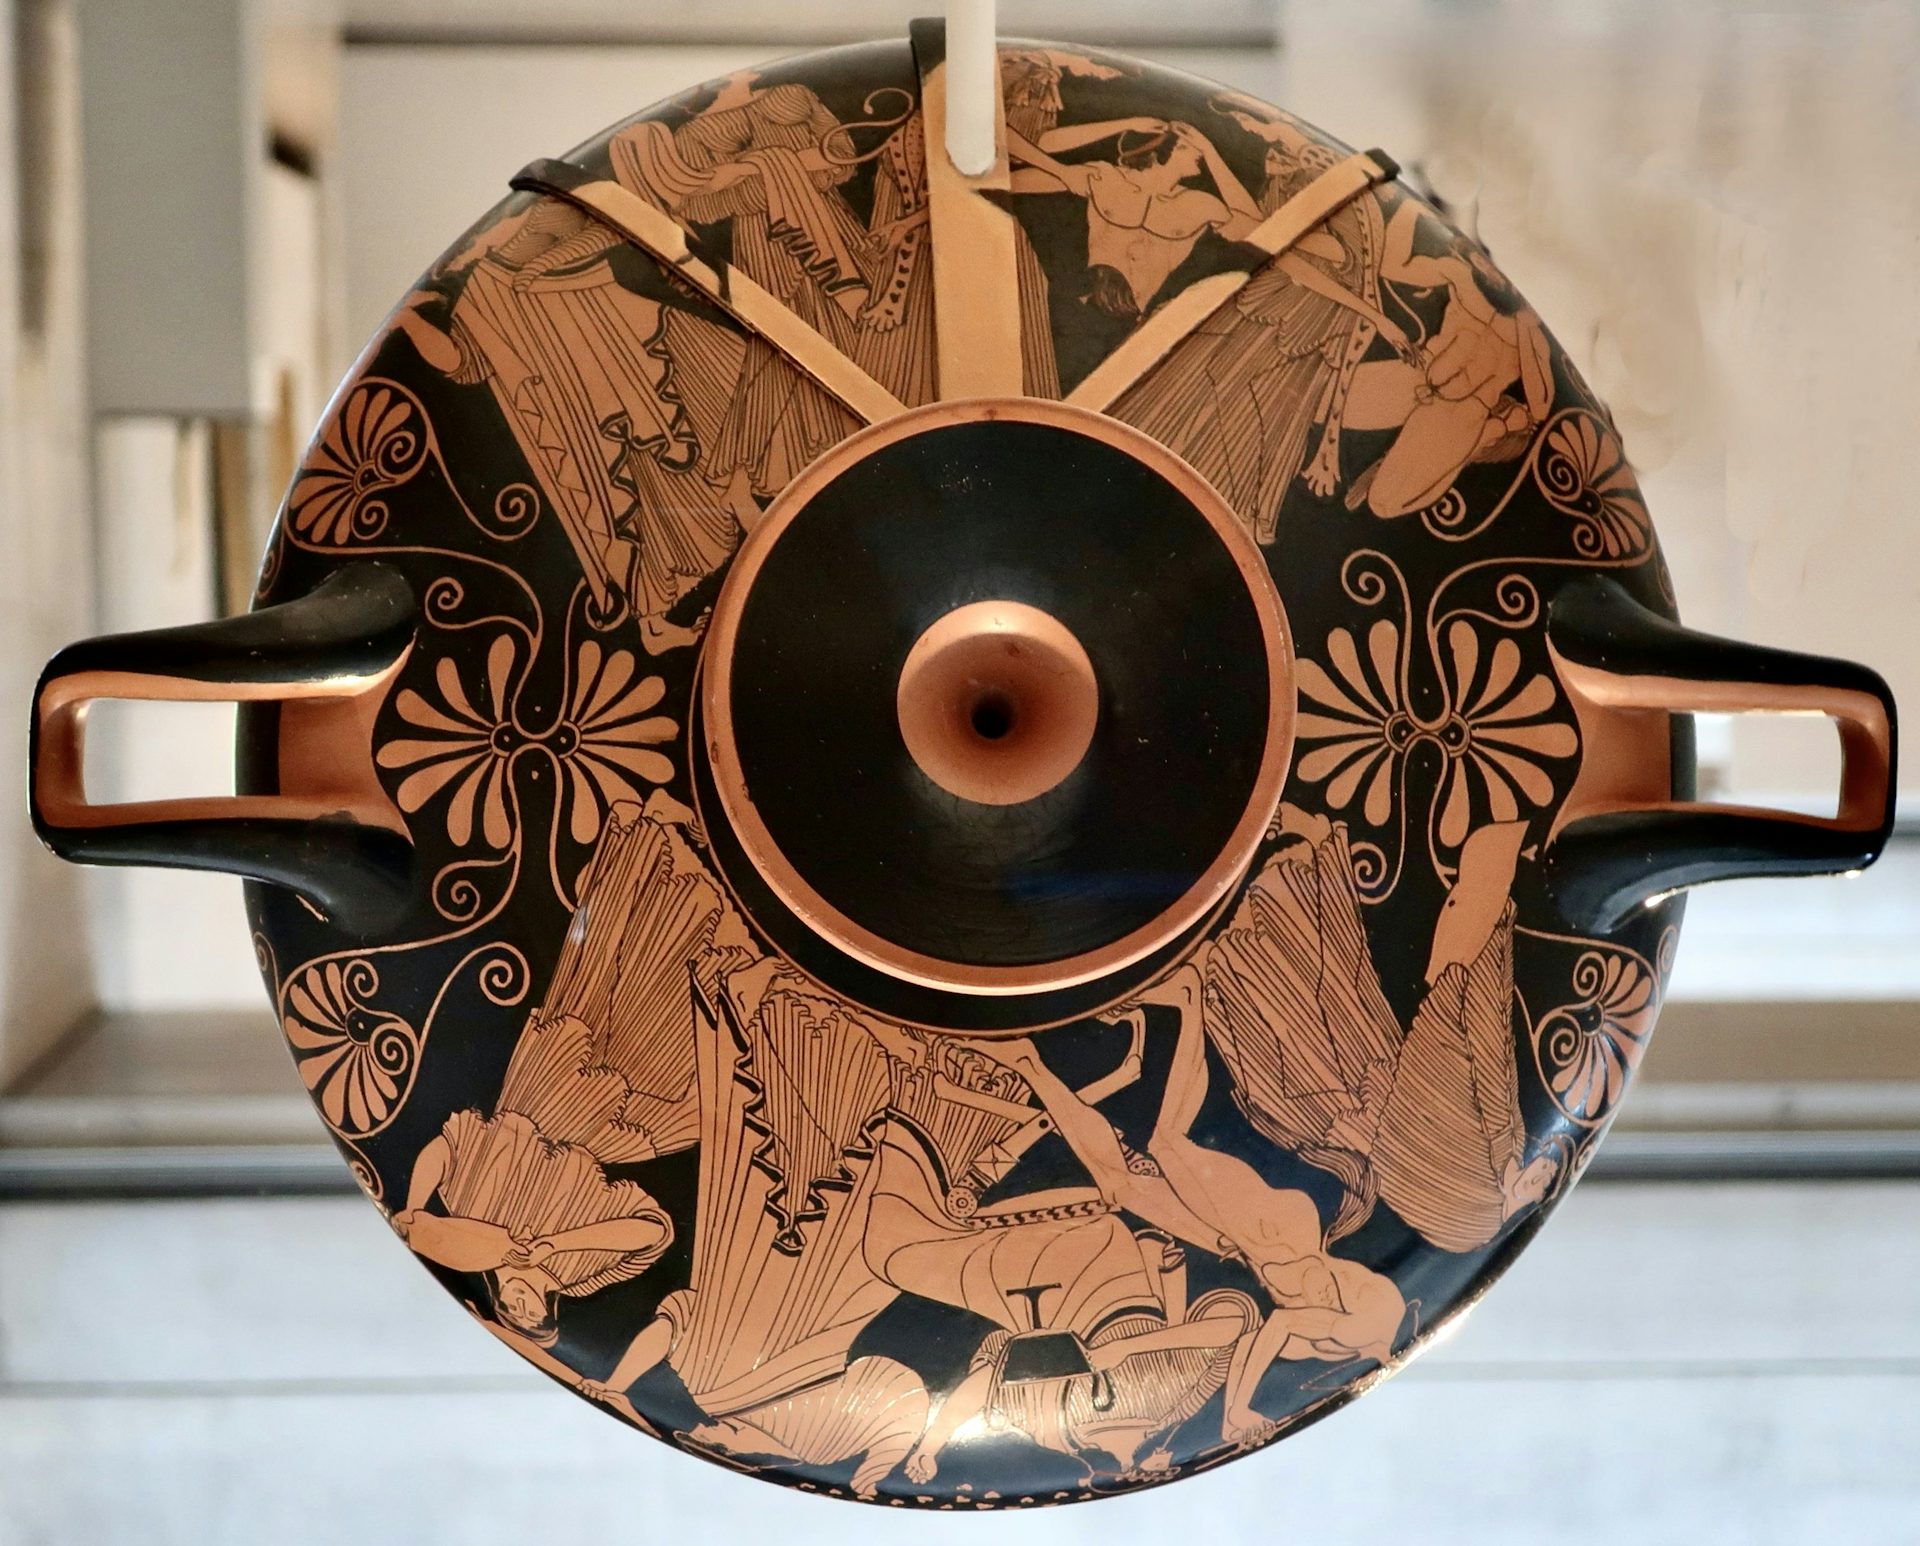 Vase painting of the death of Pentheus